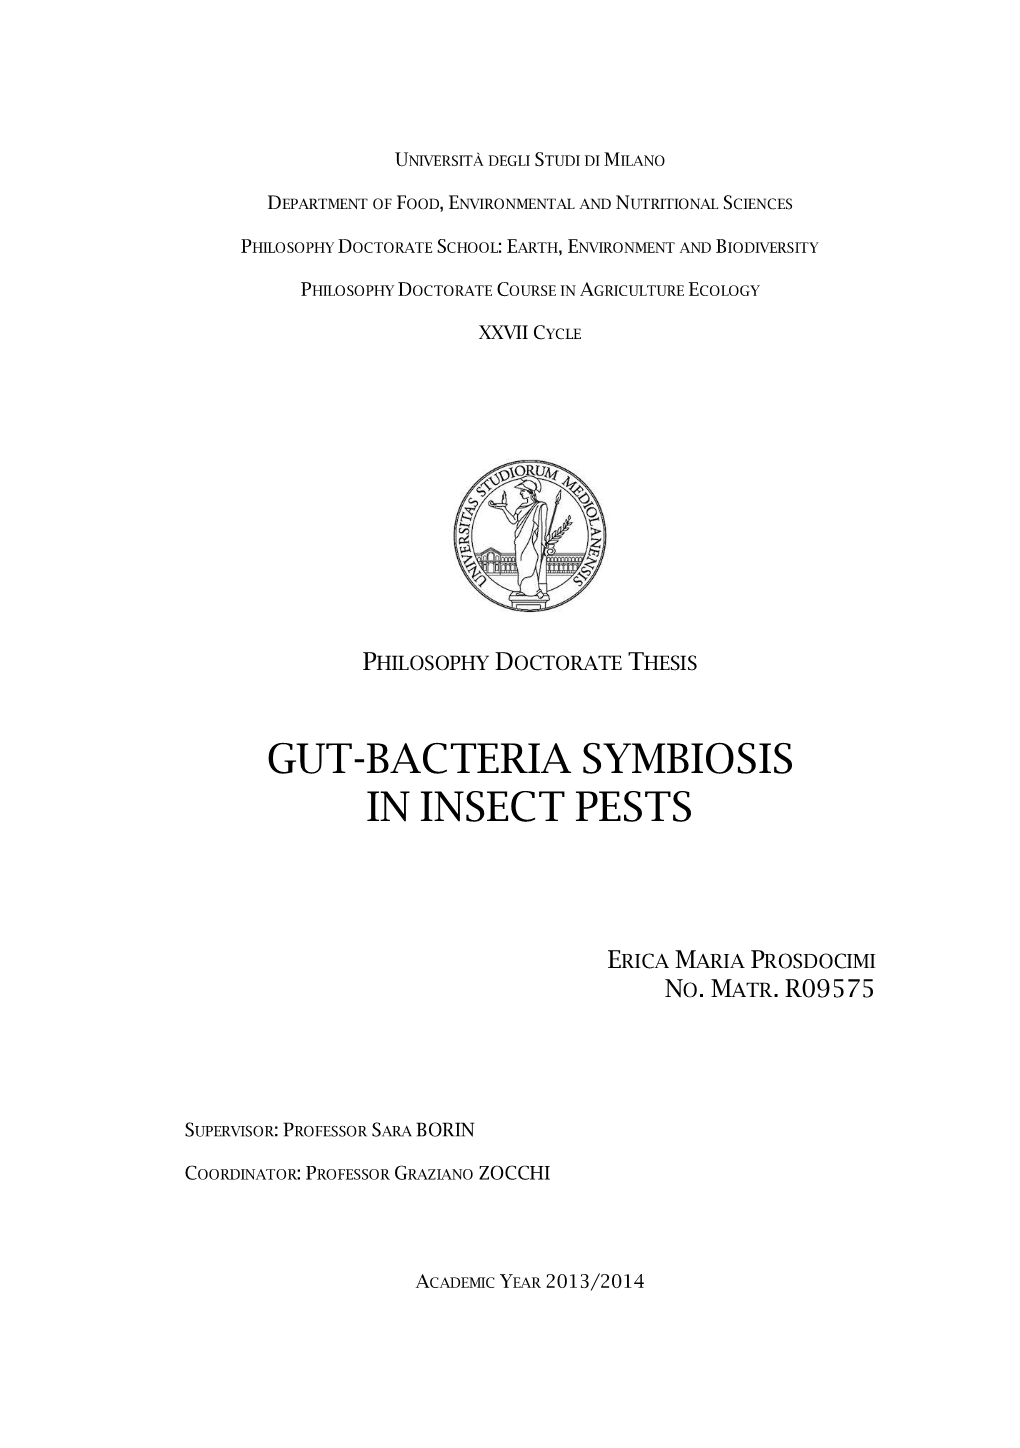 Gut-Bacteria Symbiosis in Insect Pests